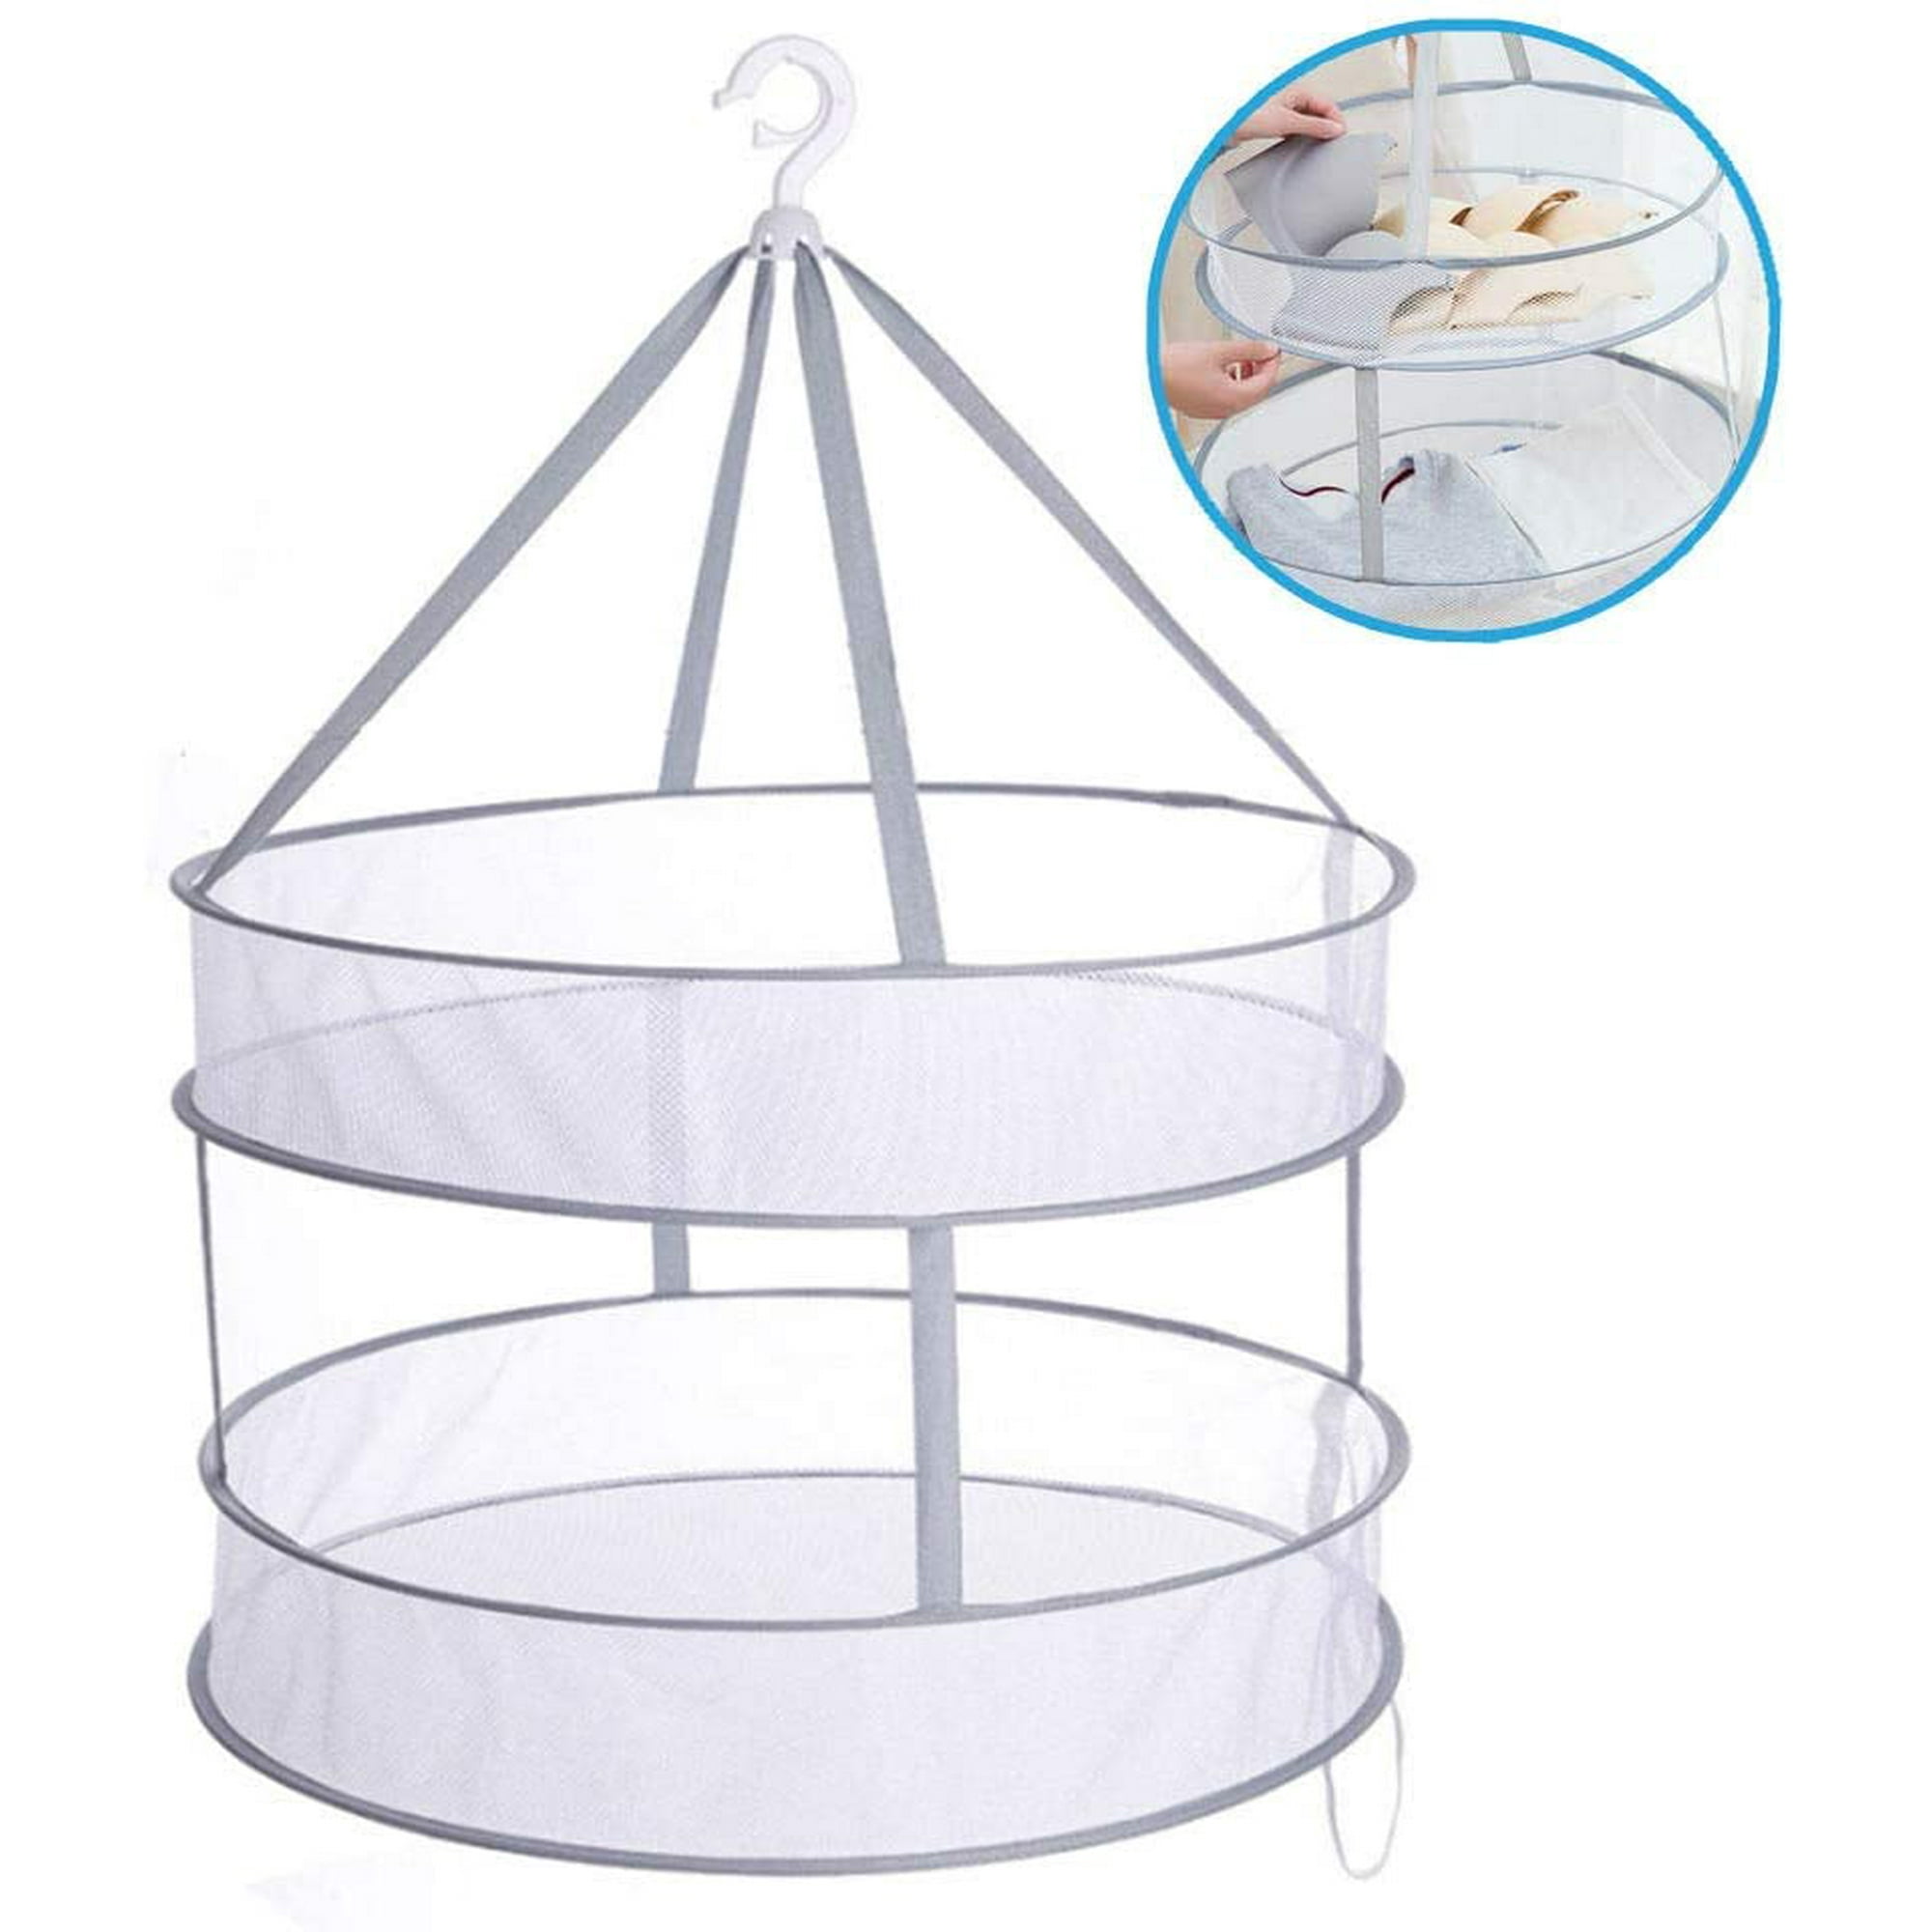 Foldable 2Layers Drying Rack Net Hanging Clothes Laundry Sweater Dryer Basket SN 